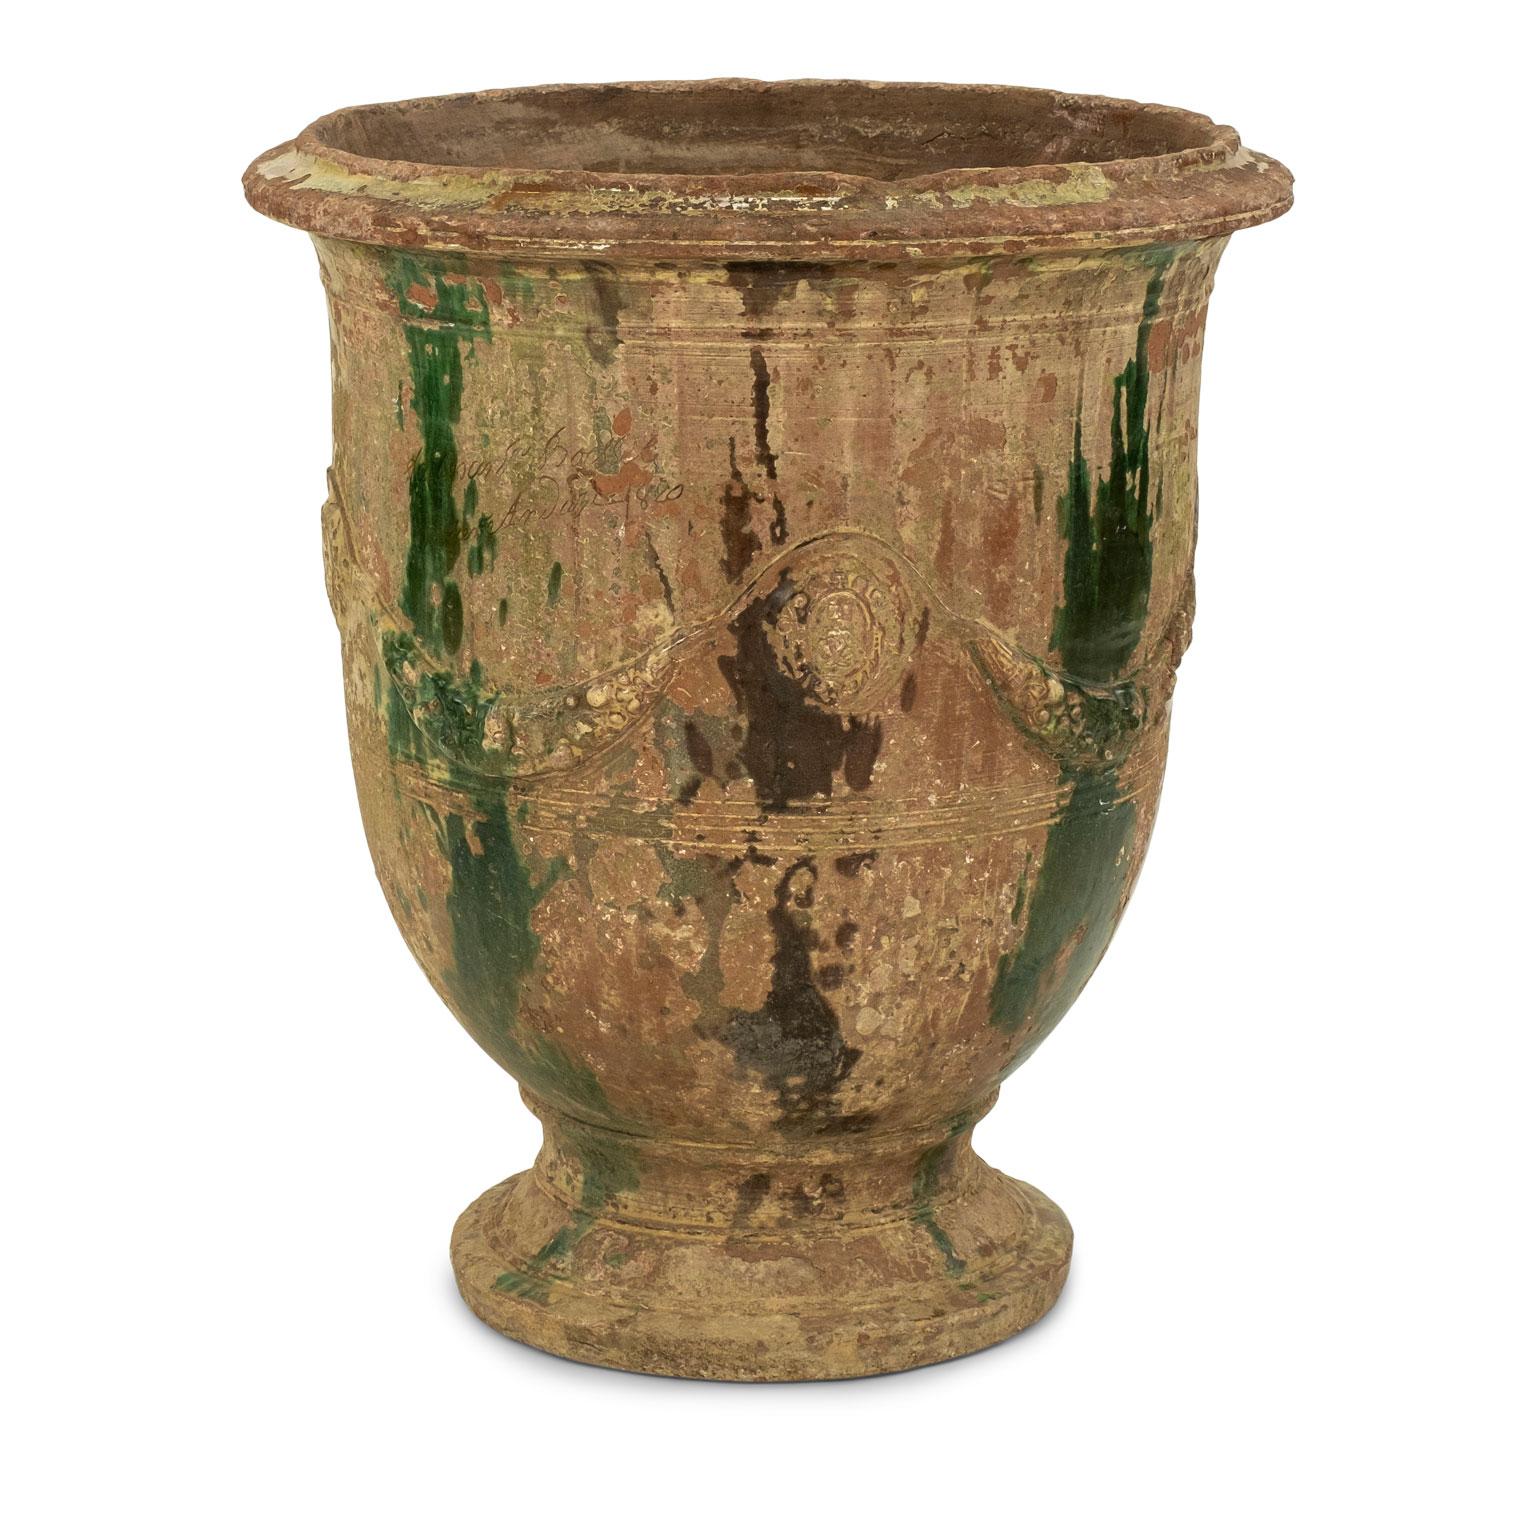 Large 19th century Anduze jar. Decorated in dark brown and green drip glaze and adorned with swag decoration in raised relief. Signed and dated by artist (1820) with the Boisset mark in cartouche. Some chipping at base and rim consistent with age